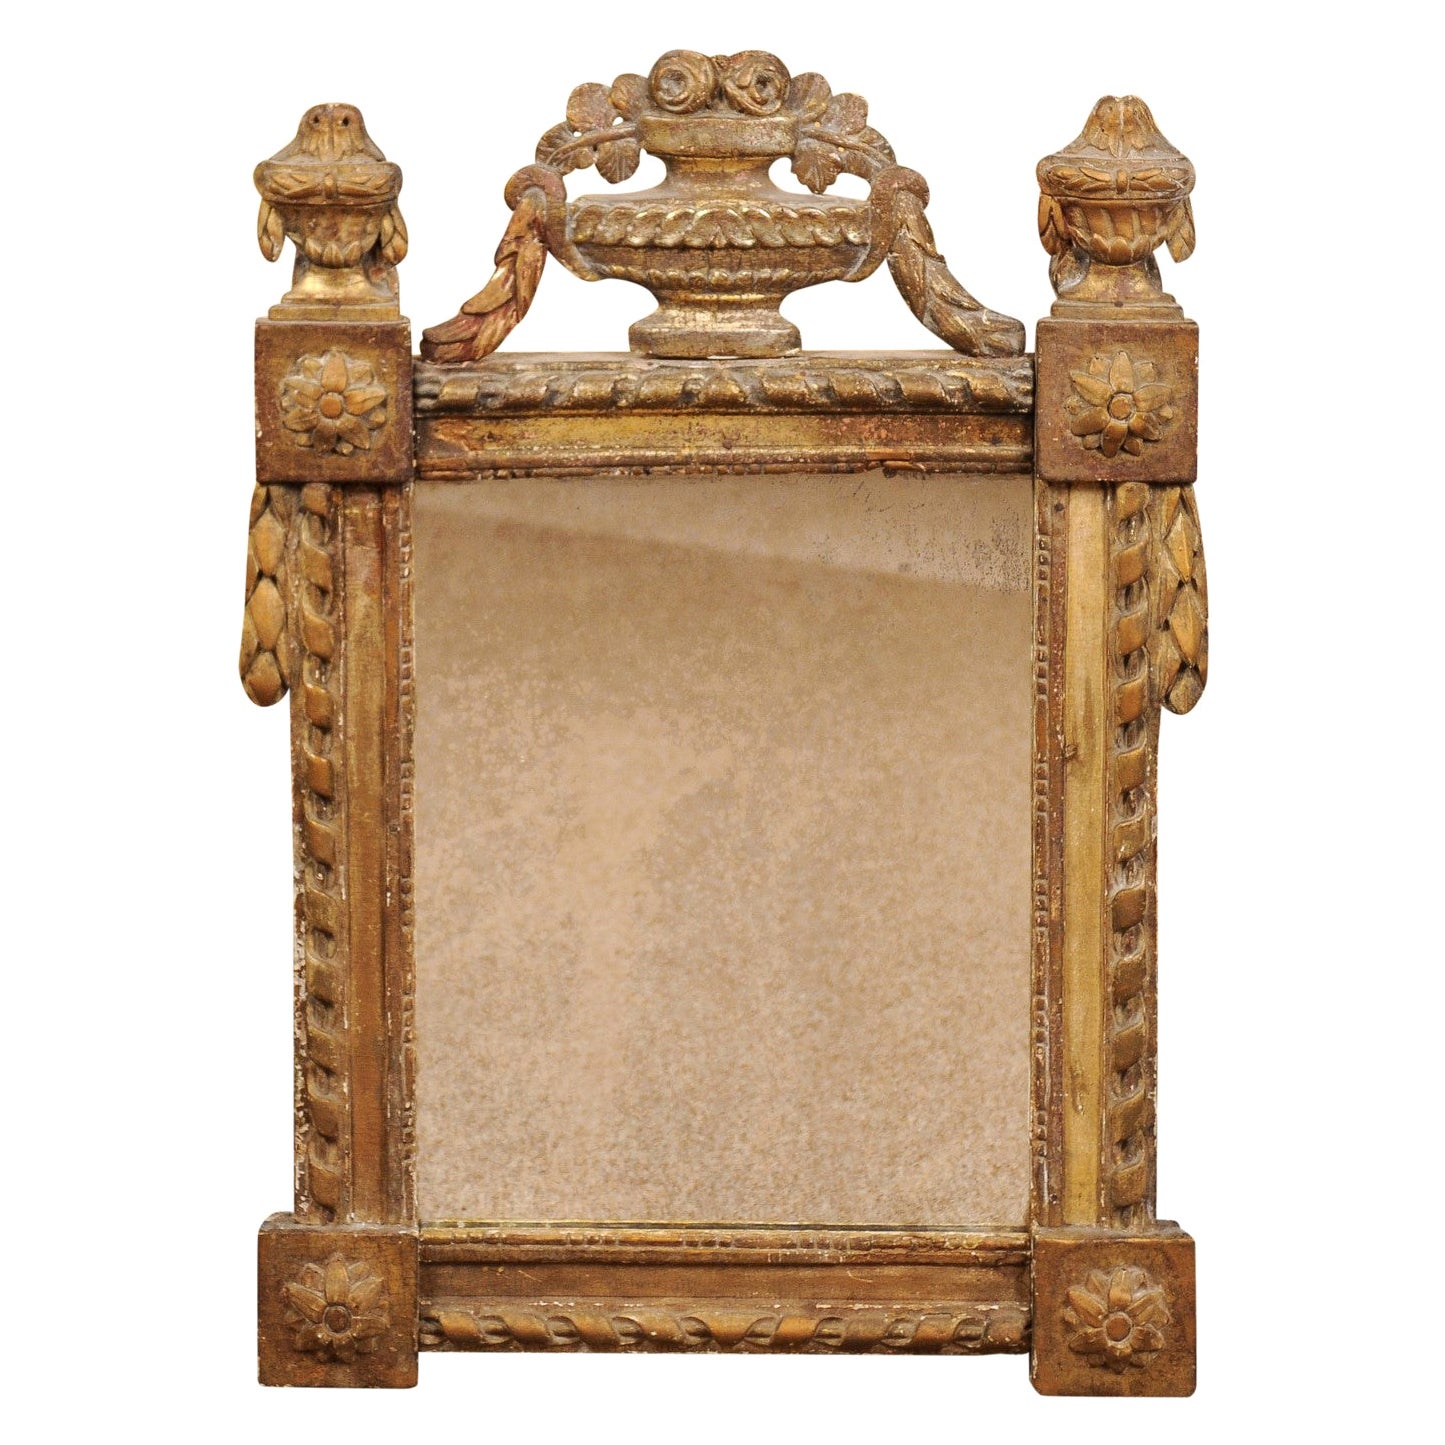 Louis XVI Period Giltwood Mirror with Urn Crest, France ca. 1790